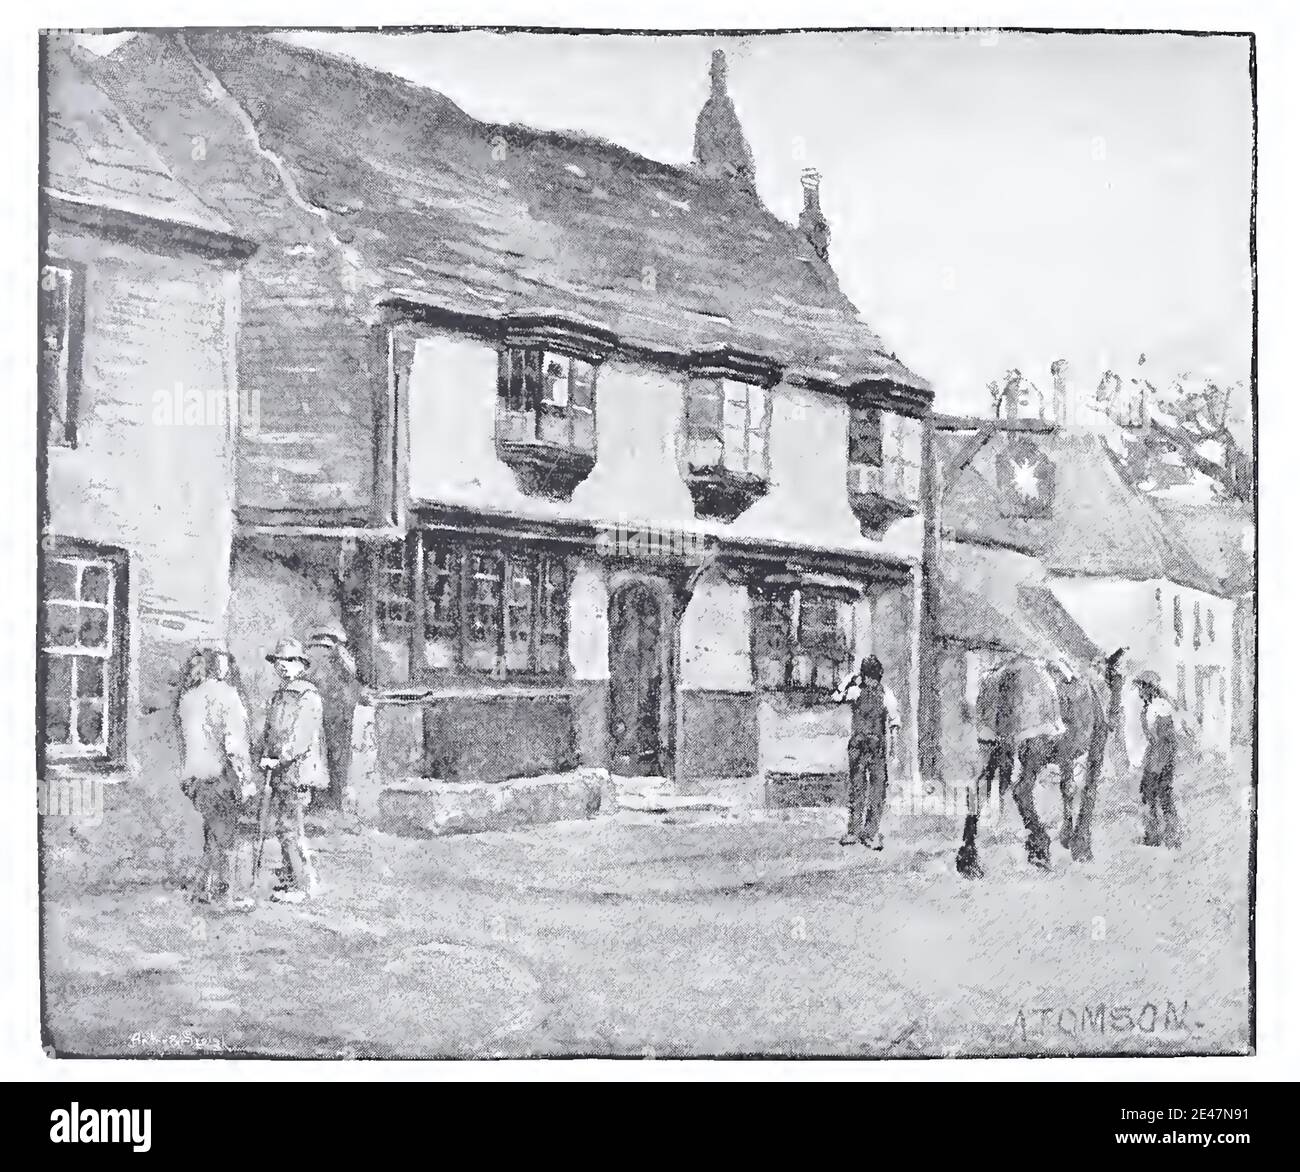 Vintage illustration by Arthur Tomson of The Star Inn, Alfriston, East Sussex, England. Traditional image of an old english public house. Stock Photo